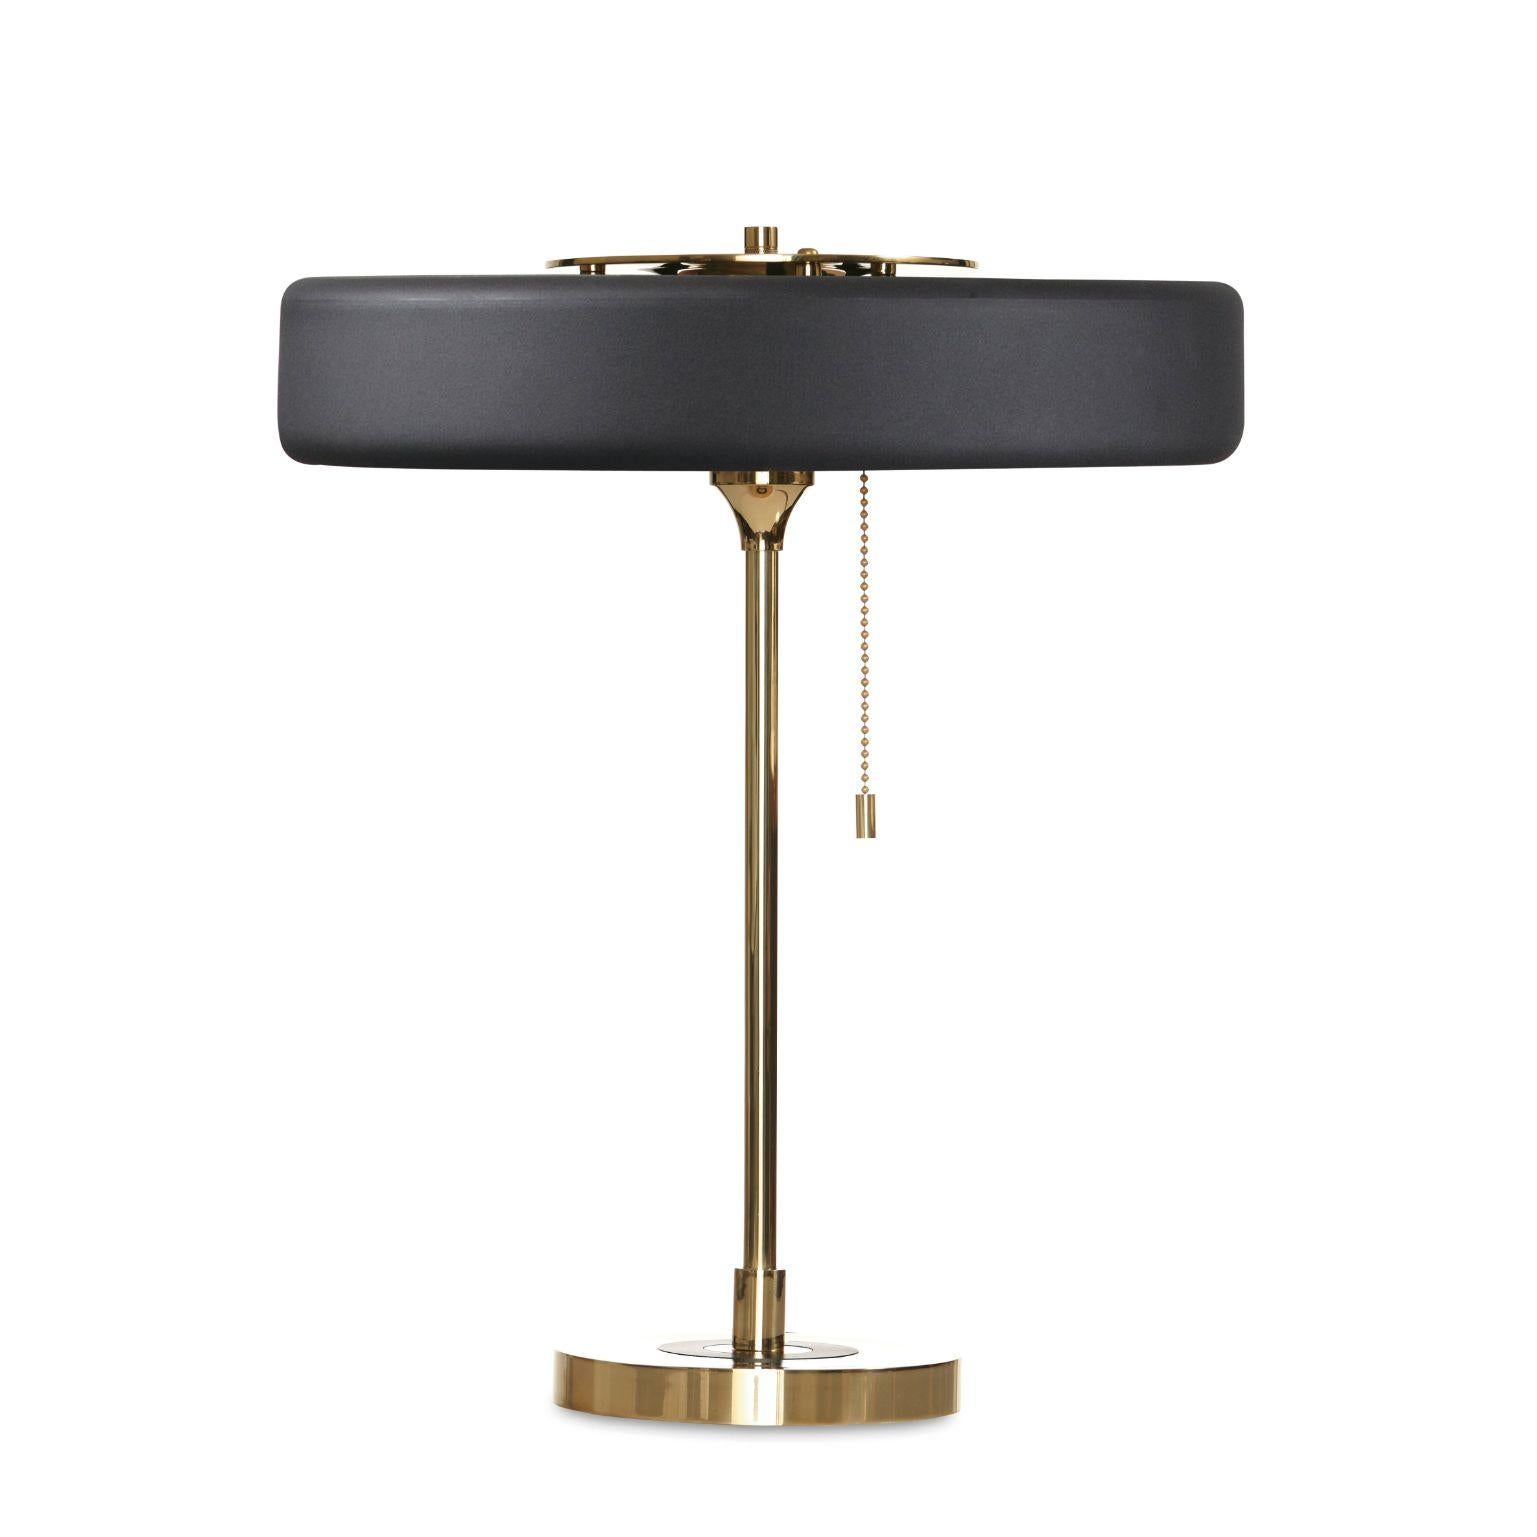 Revolve table lamp - Polished brass - Black by Bert Frank
Dimensions: 42 x 35 x 15 cm
Materials: Brass, Steel

Also available in brushed brass

When Adam Yeats and Robbie Llewellyn founded Bert Frank in 2013 it was a meeting of minds and the start